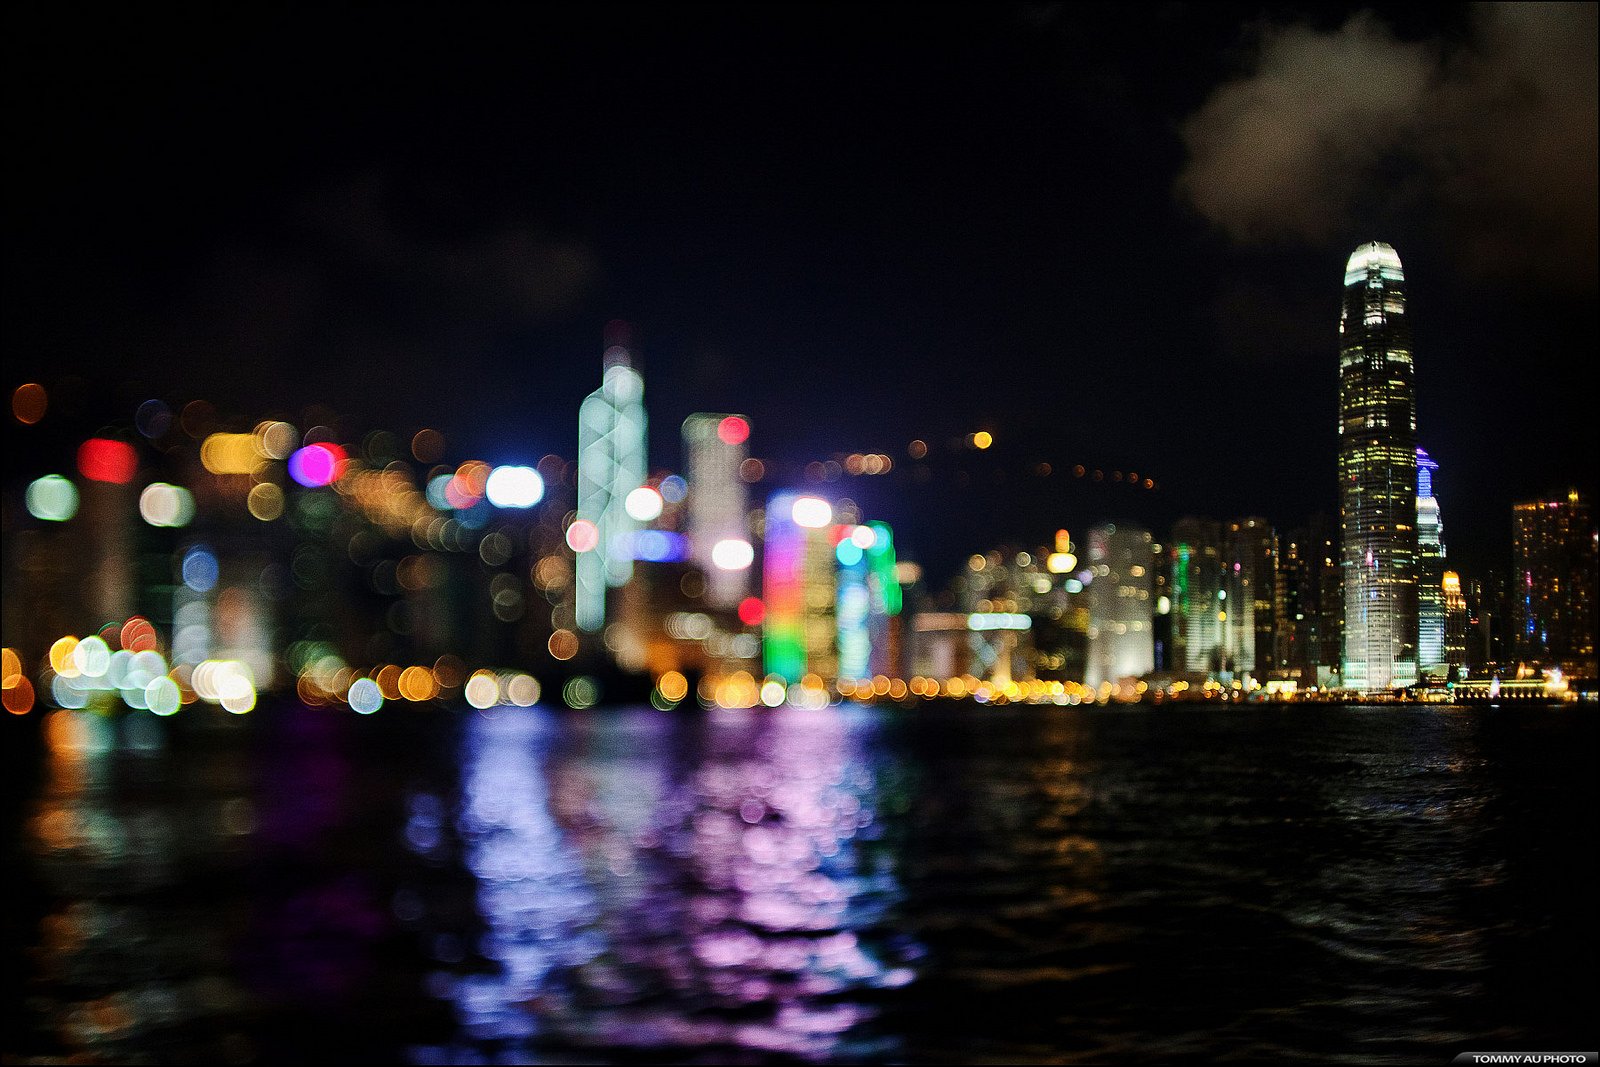 architecture, Bridge, Buildings, Cities, Cityscape, Contrast, Empire, Lights, Night, Panorama, Place, Rivers, Scenic, Shift, Skyline, Skyscrapers, View, Water, Window, World, China, Honkong Wallpaper